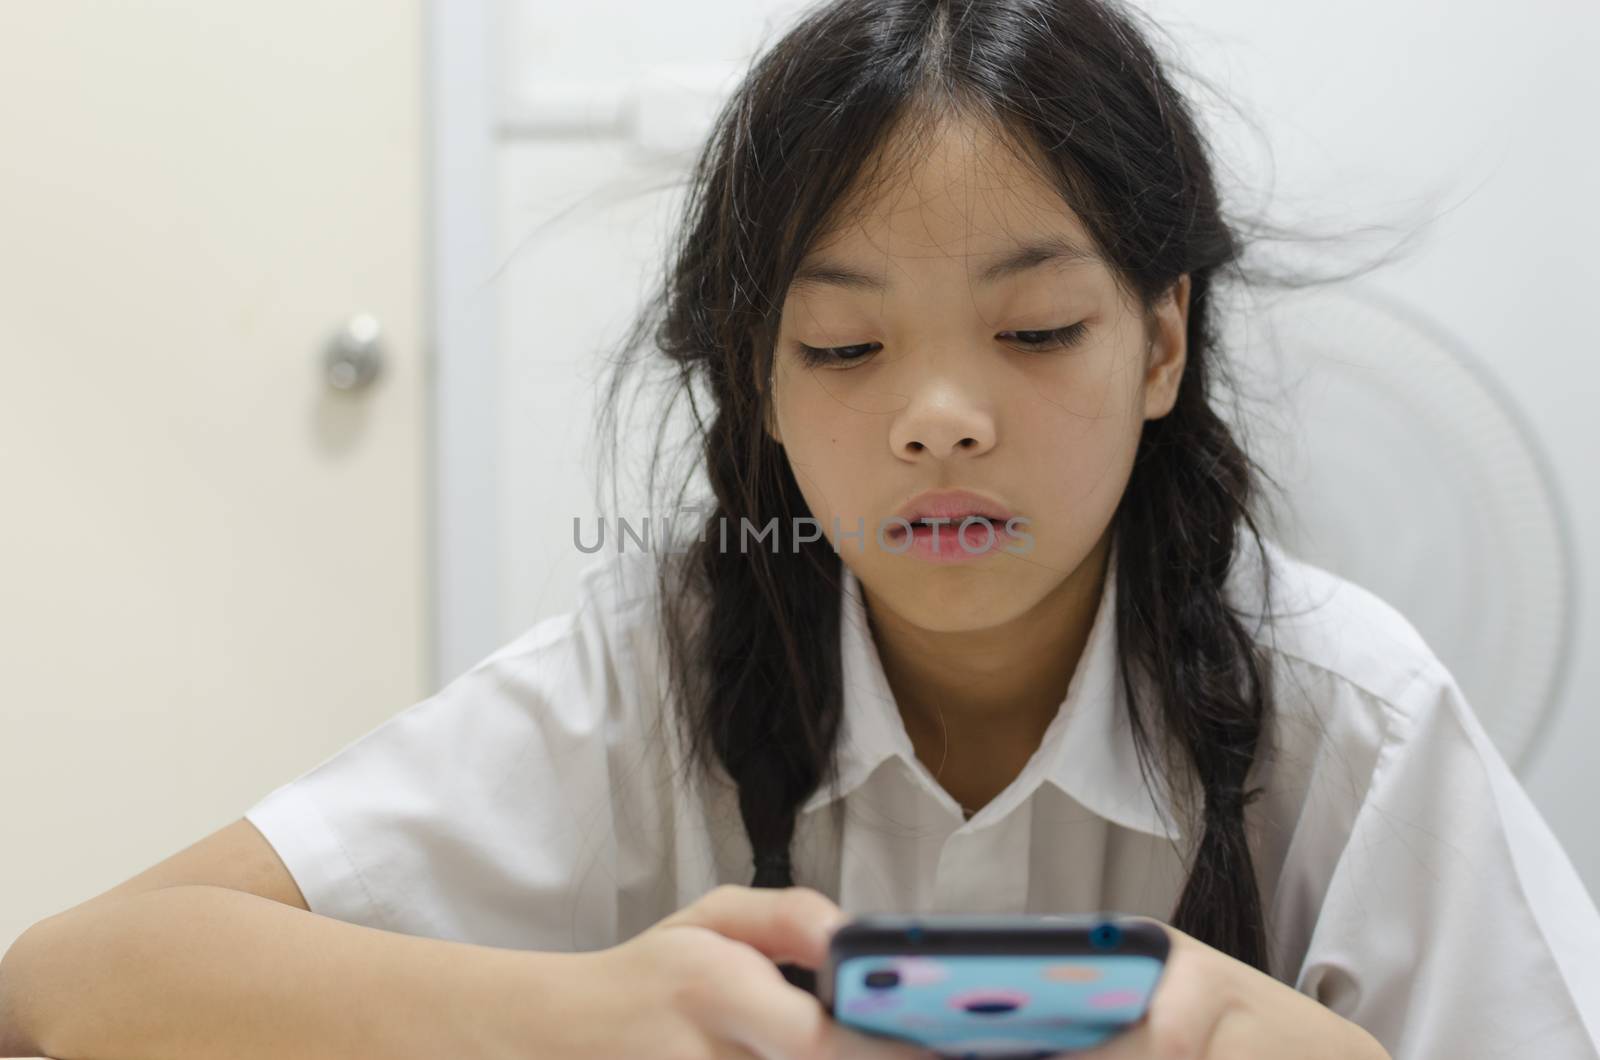 children addicted to phone games by aoo3771